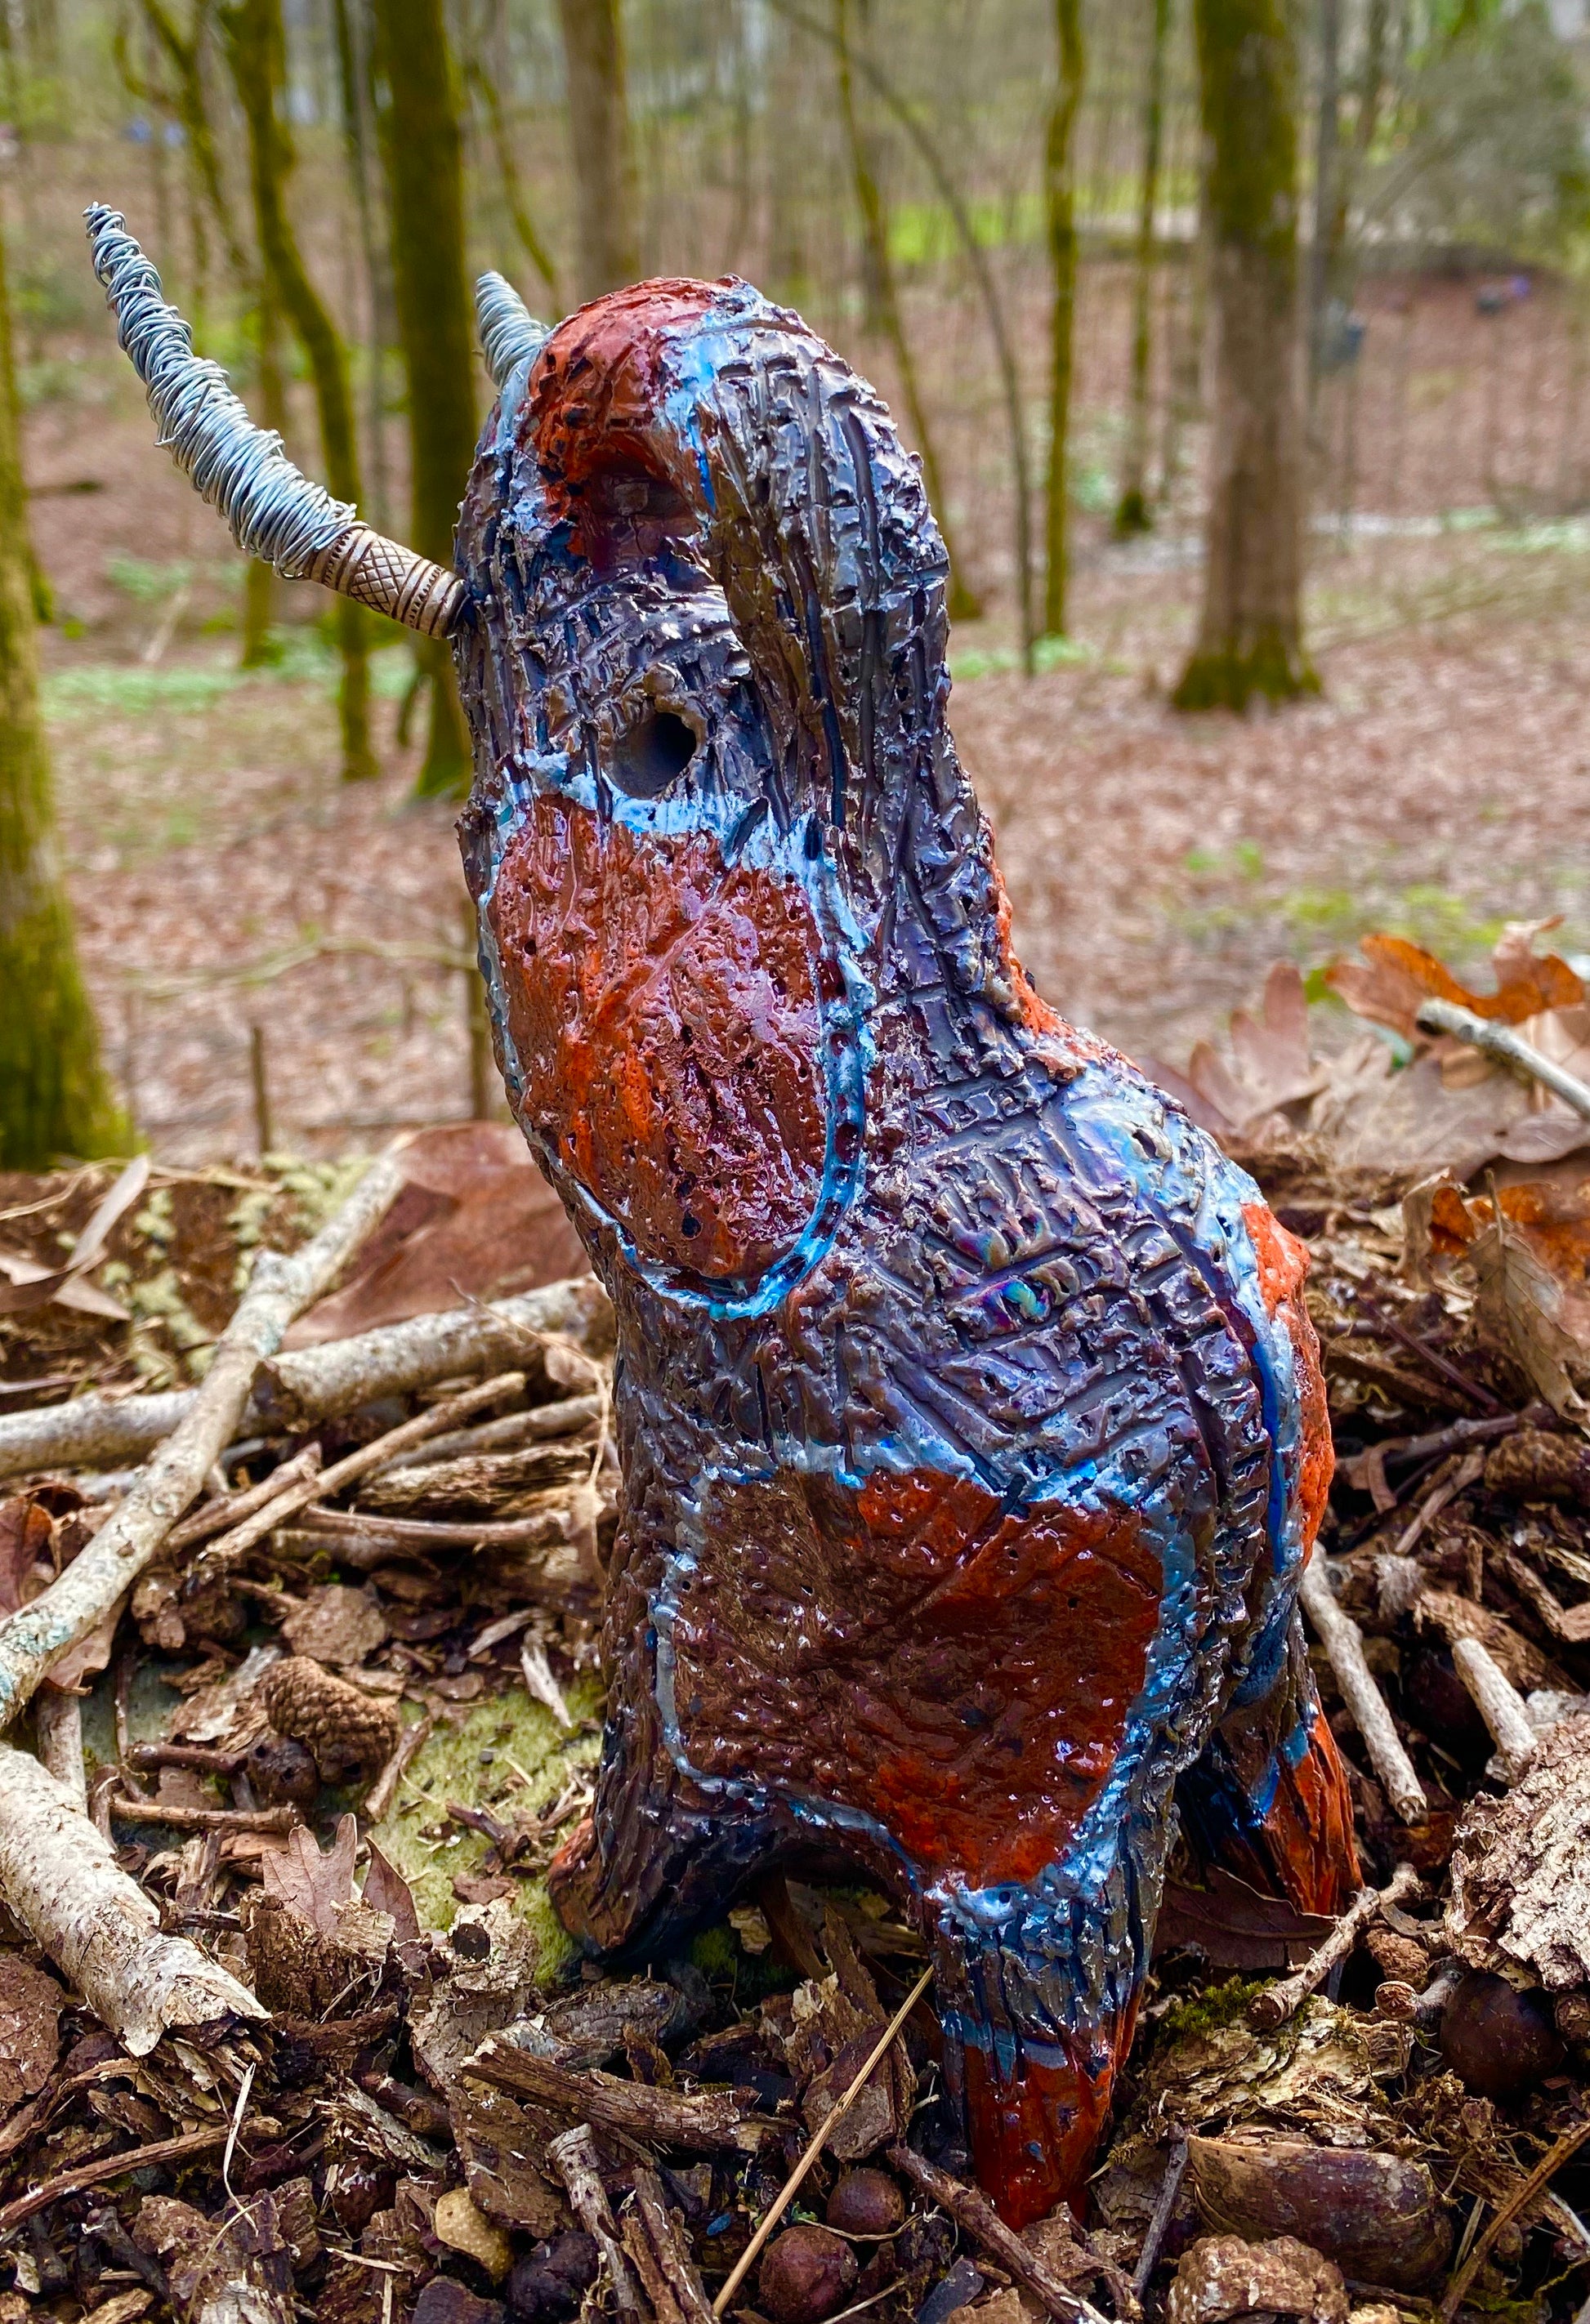 Have you HERD!!!!!!  Just one of these lovely Raku Fired Elephant will make an excellent gift for your  friend, sorority or for your home’ special place centerpiece.  9.5" x 4" x 7" 1.10 lbs Silver wire beaded tusk Beautiful metallic copper and orange raku colors For decorative purposely only.